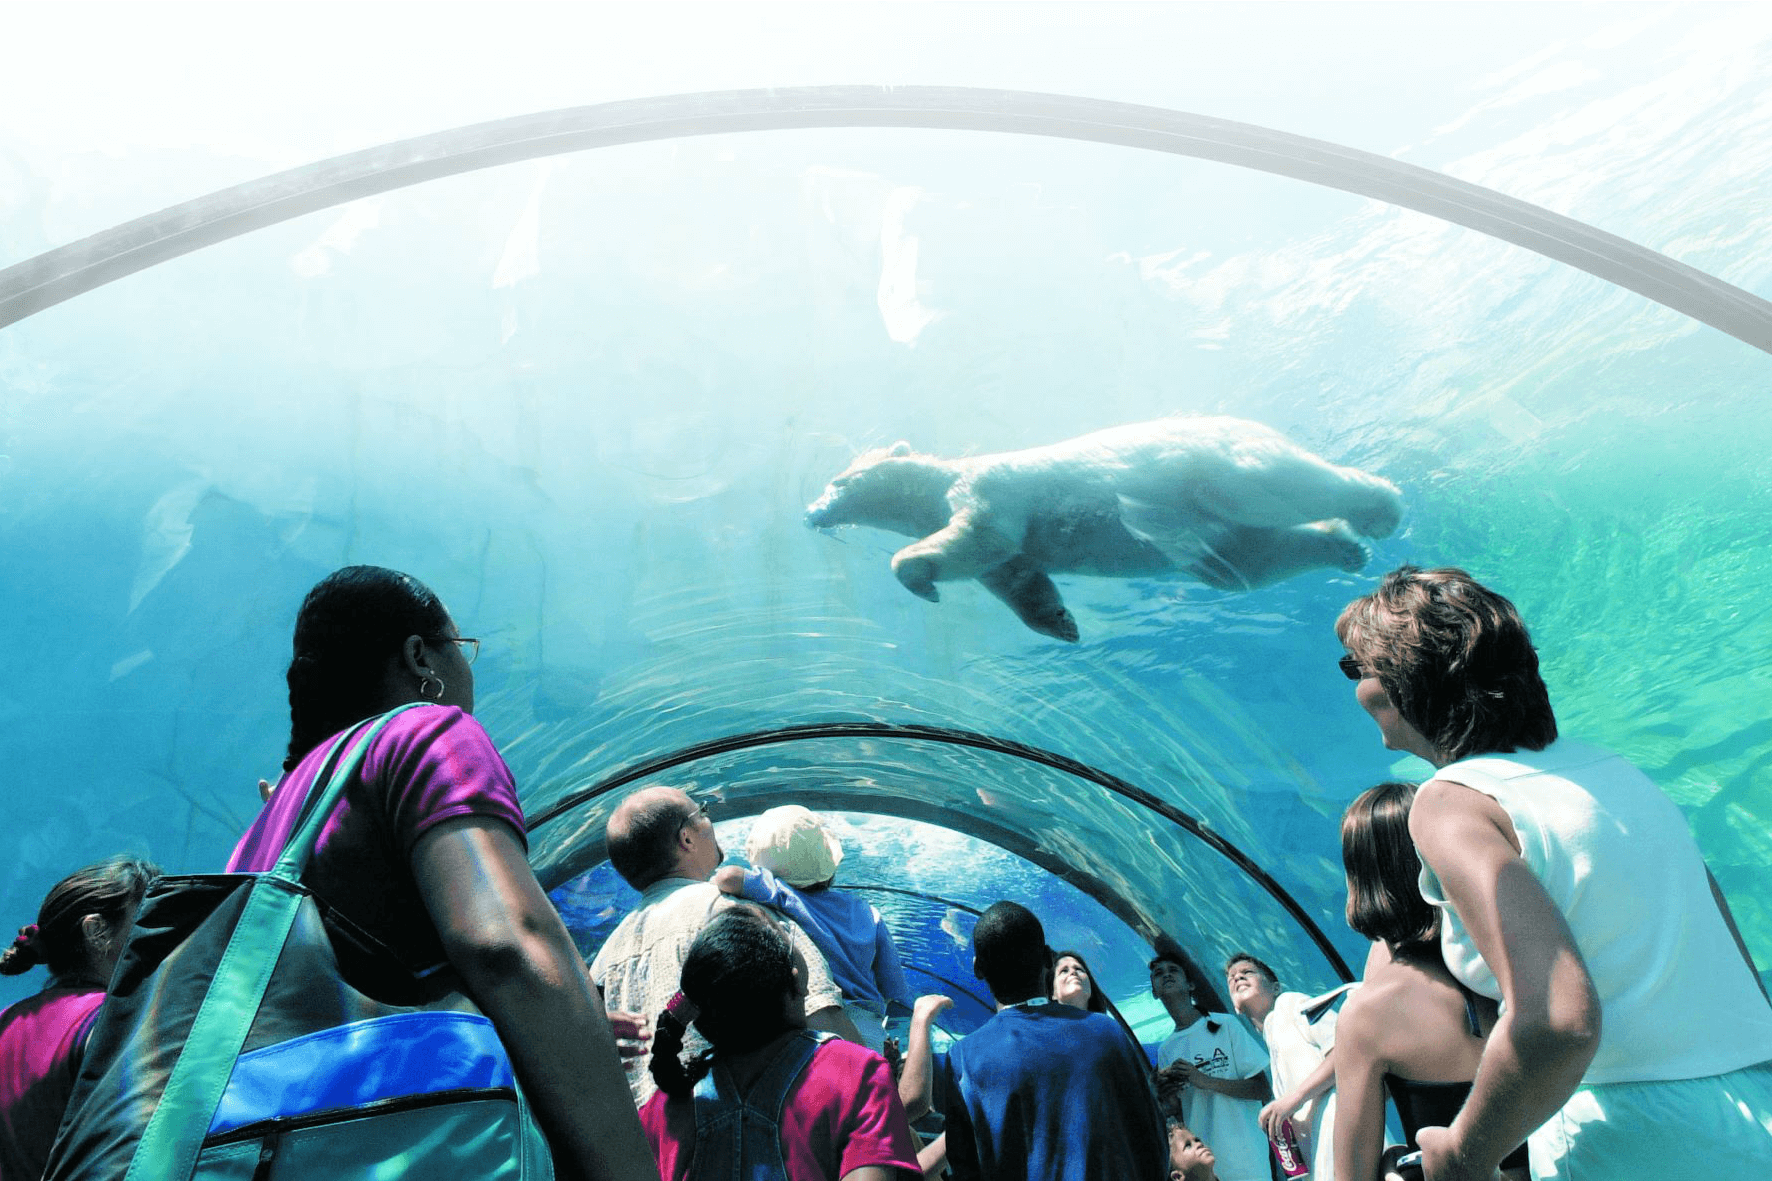 OUR FAVORITE PLACES TO SEE ANIMALS